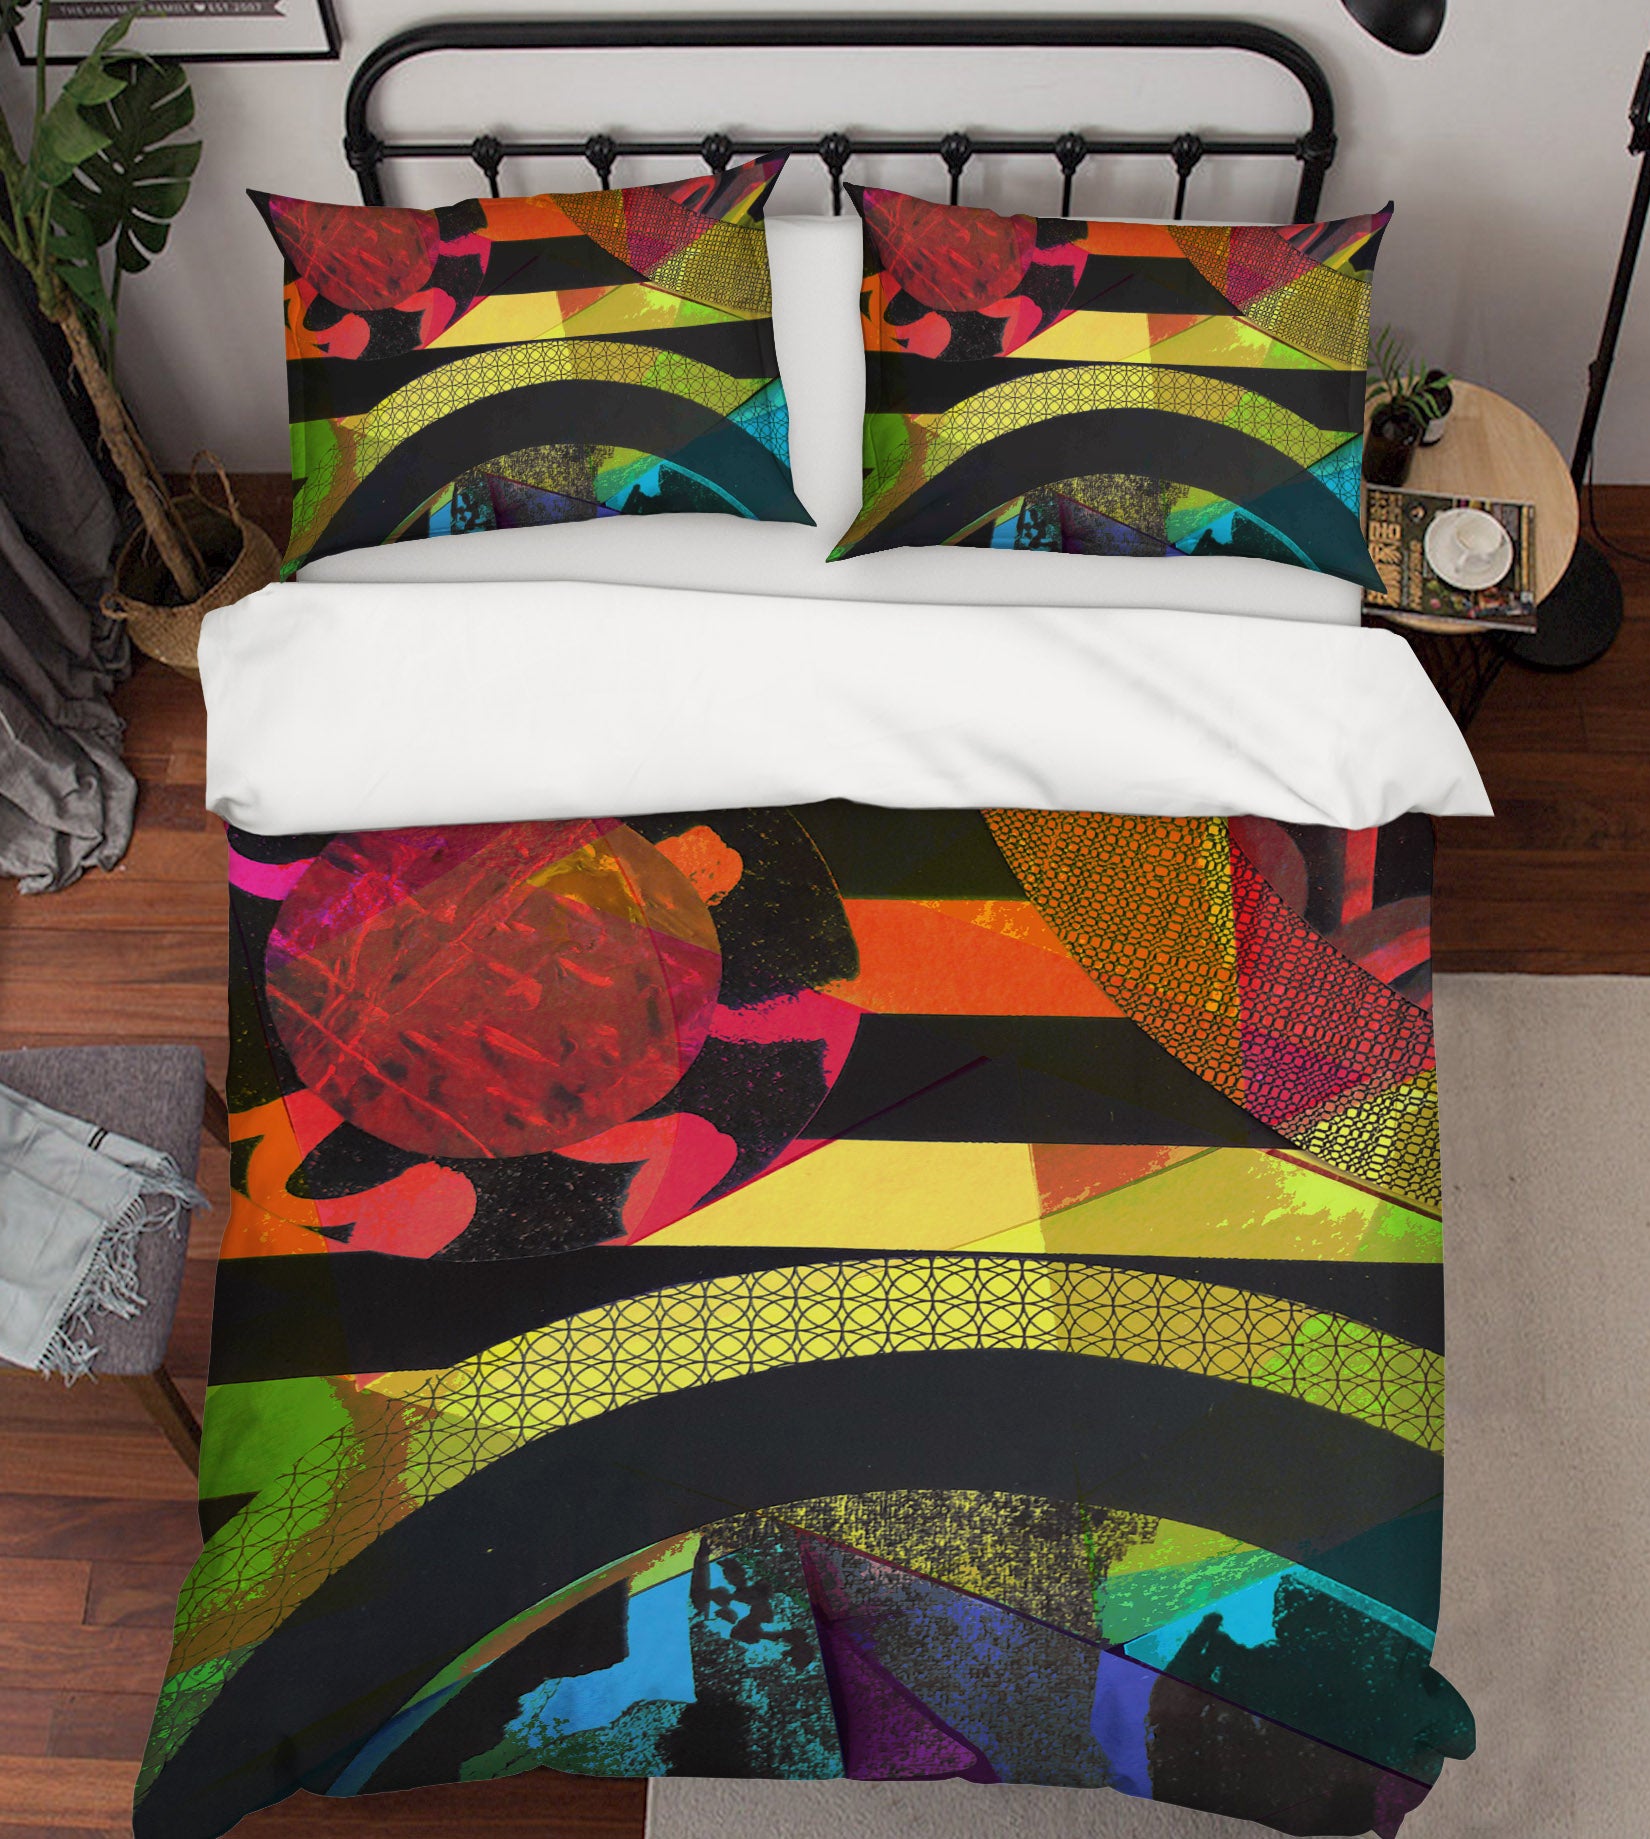 3D Colorful Pattern 19144 Shandra Smith Bedding Bed Pillowcases Quilt